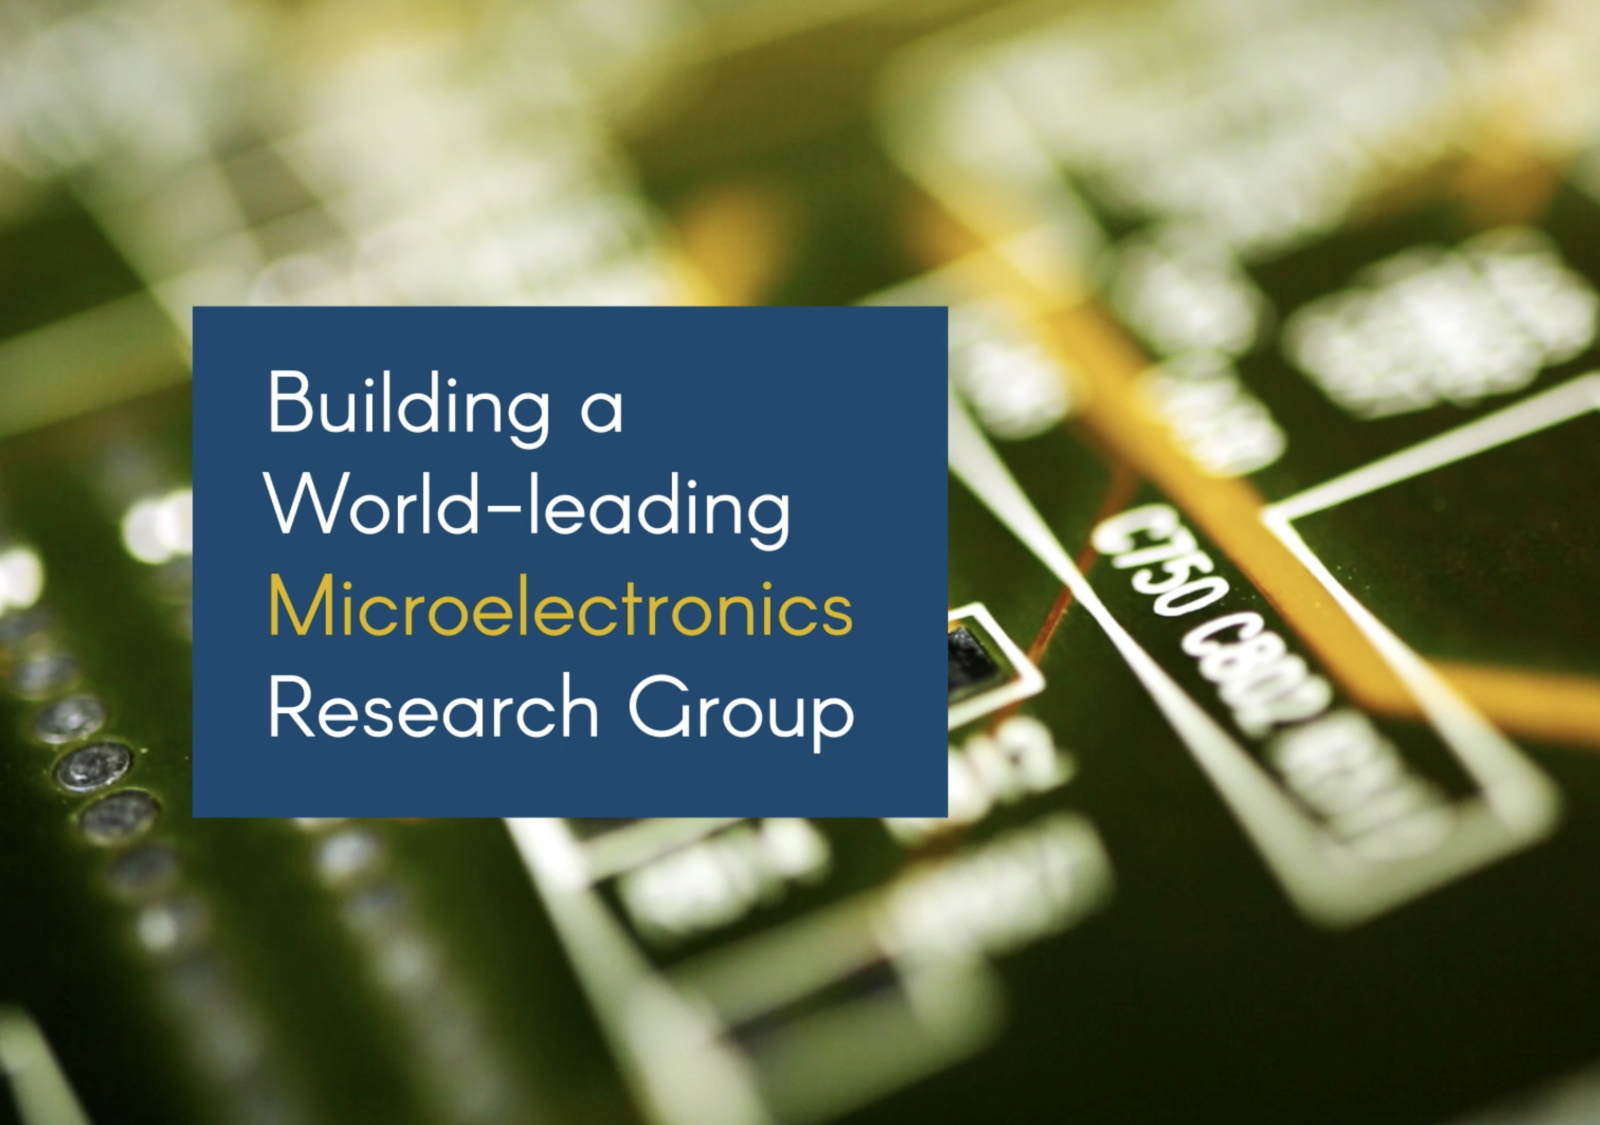 Building a World-leading Microelectronics Research Group